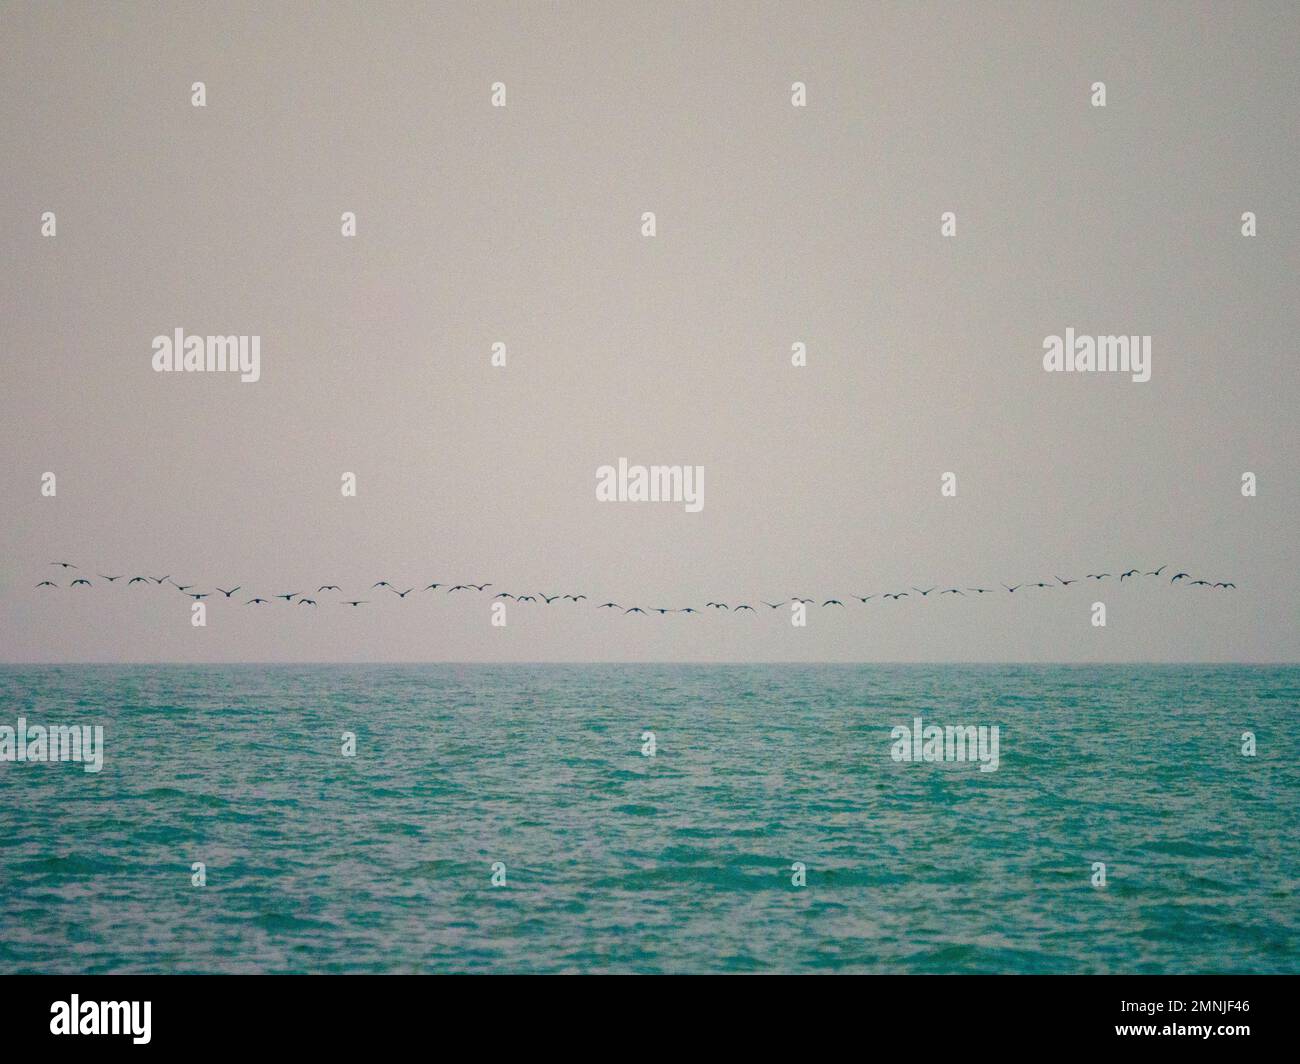 Flock of birds flying above smooth sea Stock Photo